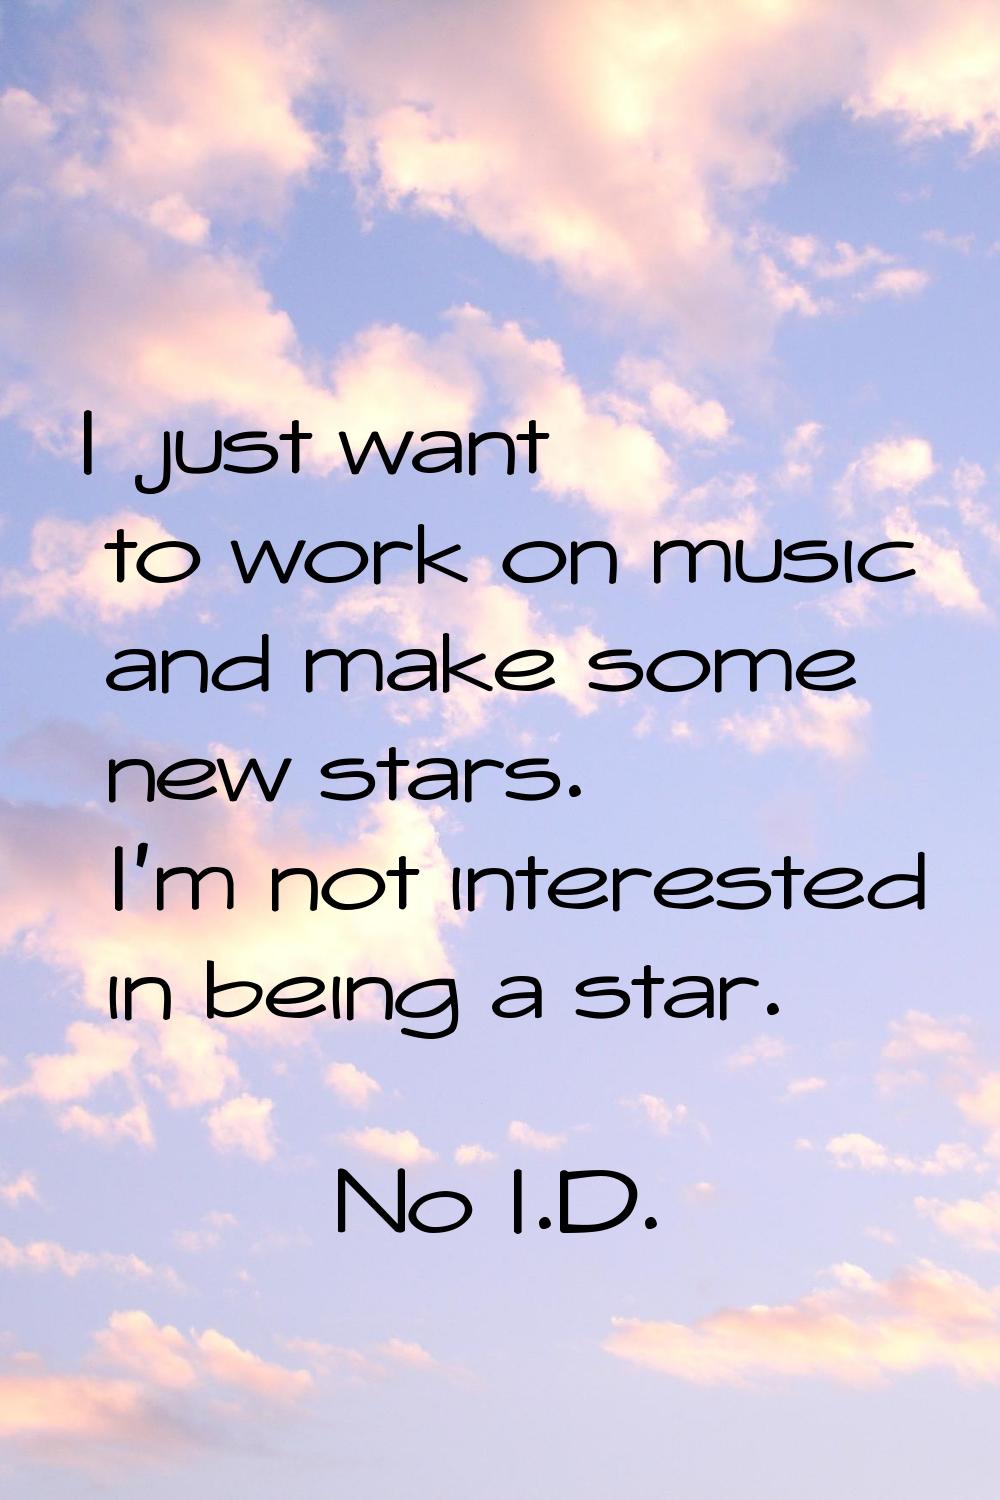 I just want to work on music and make some new stars. I'm not interested in being a star.